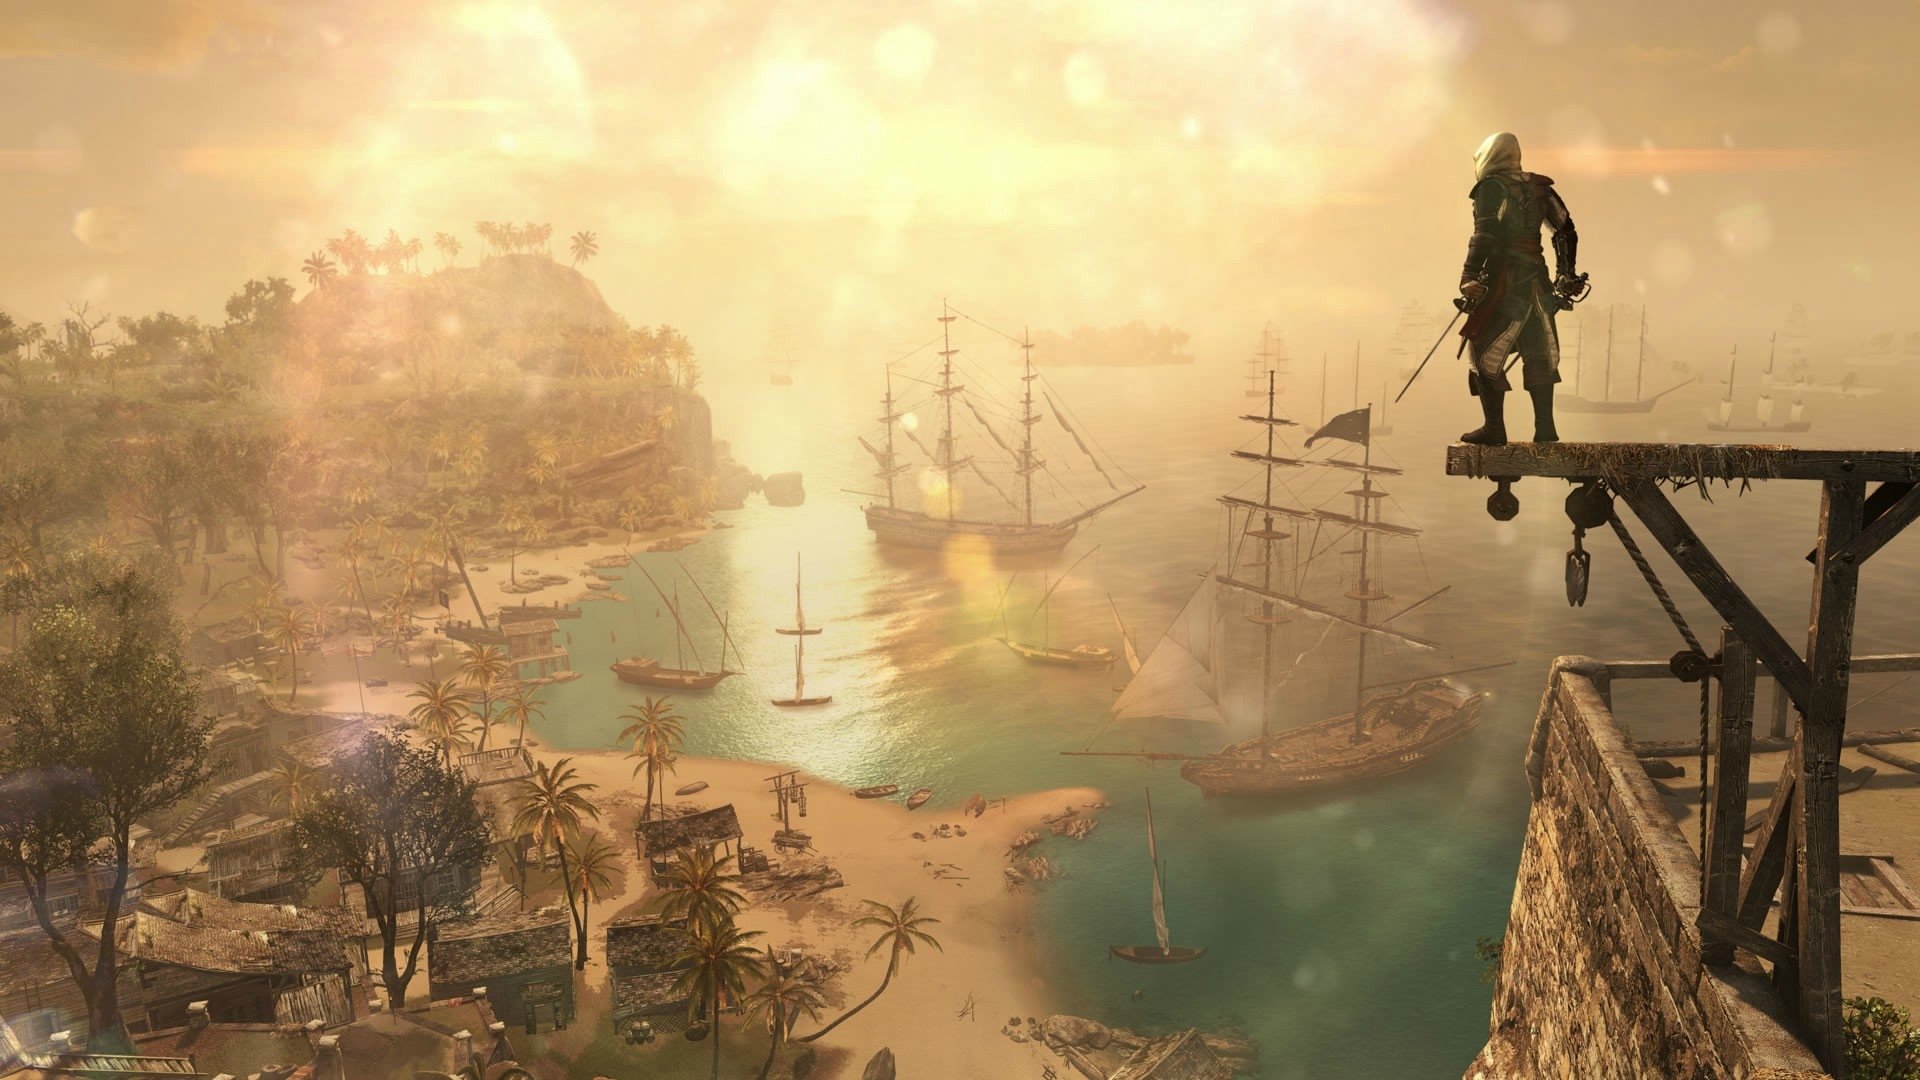 ac4 wallpaper,action adventure game,strategy video game,pc game,atmospheric phenomenon,water